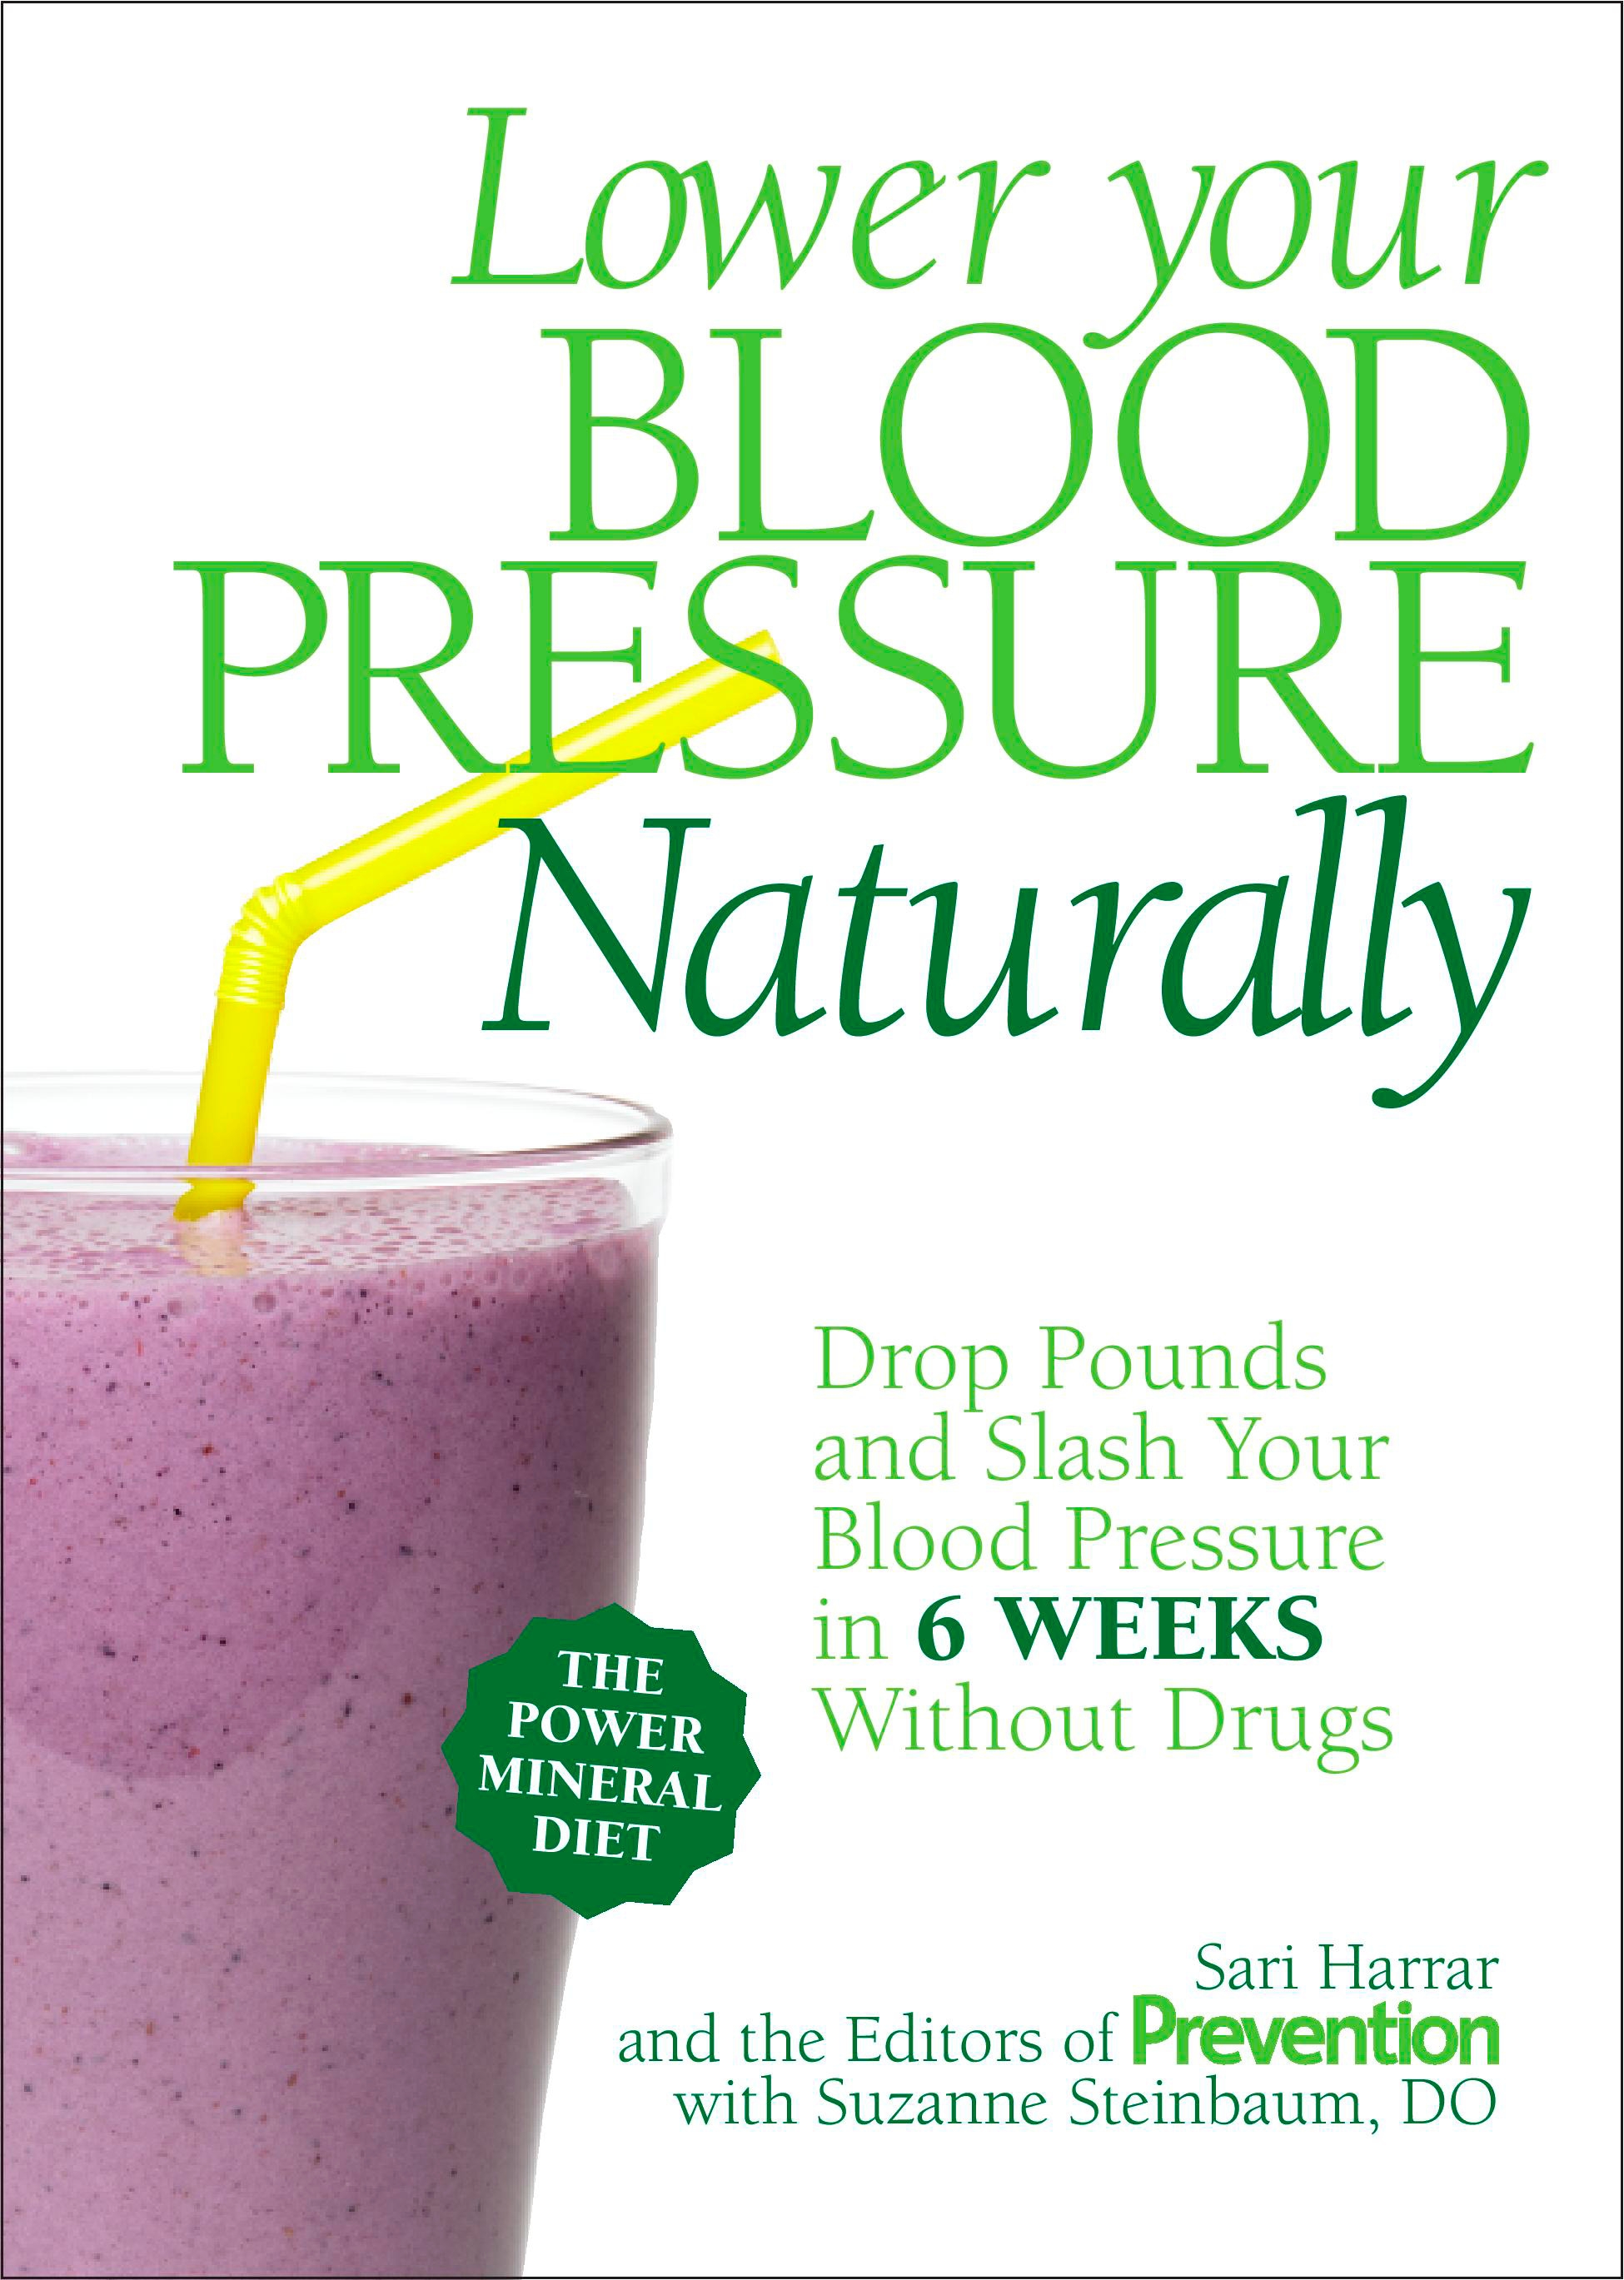 Cover of the book 'Lower Your Blood Pressure Naturally' by Sari Harrar